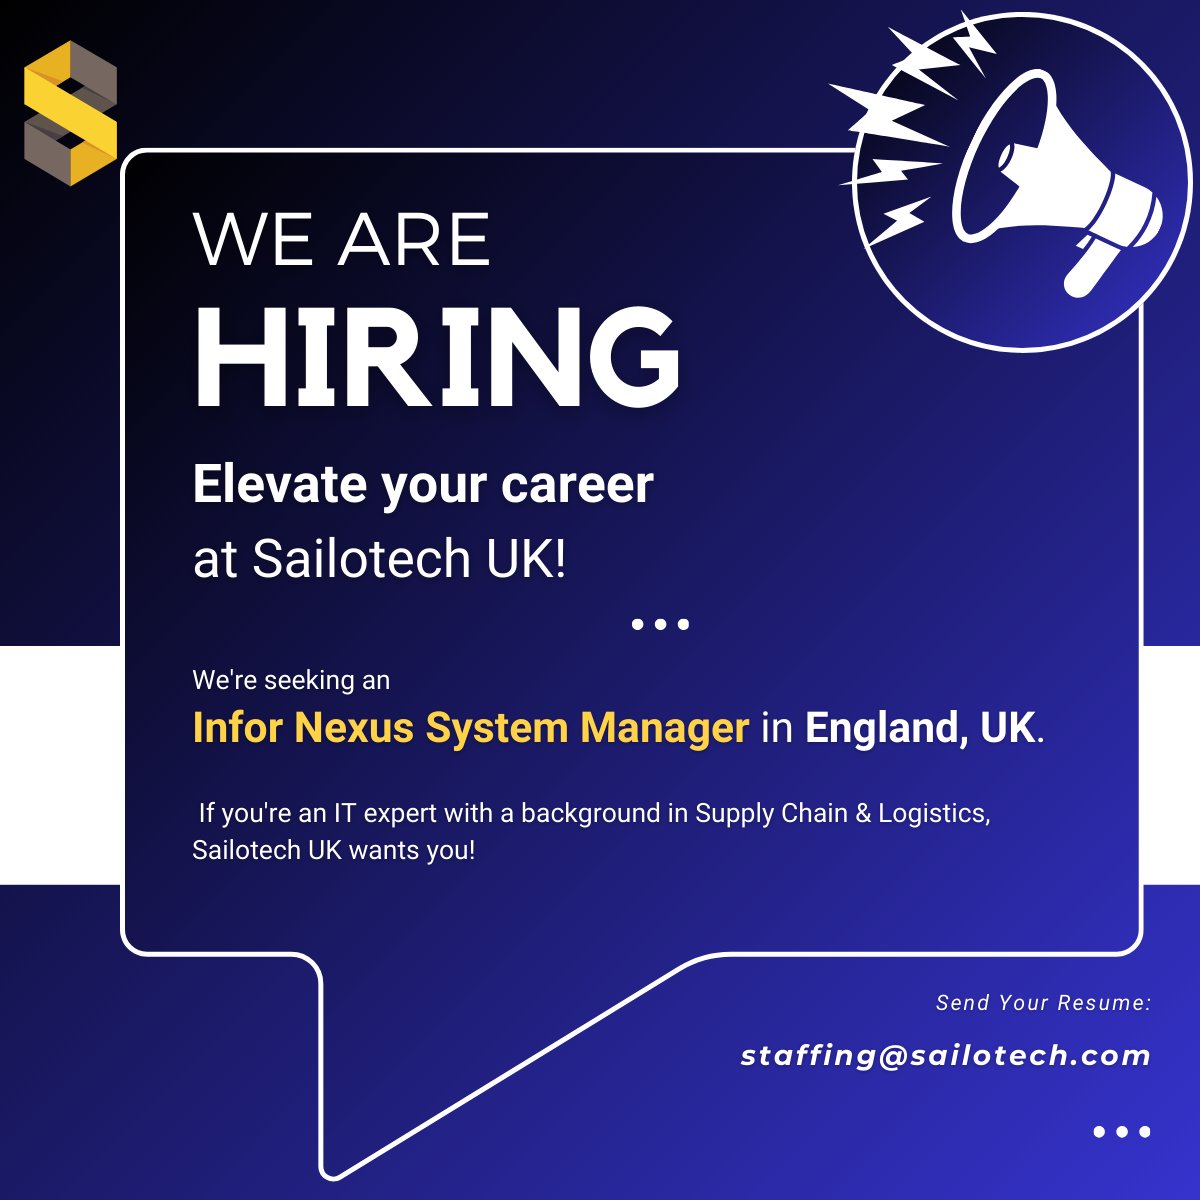 Exciting Opportunity at Sailotech UK! Join our dynamic team as an Infor Nexus System Manager in the vibrant city of Reading, England]Share your resume at staffing@sailotech.com

#sailotechUK #jobopportunity #infornexus #readingjobs #ukjobseekers #ukjobs